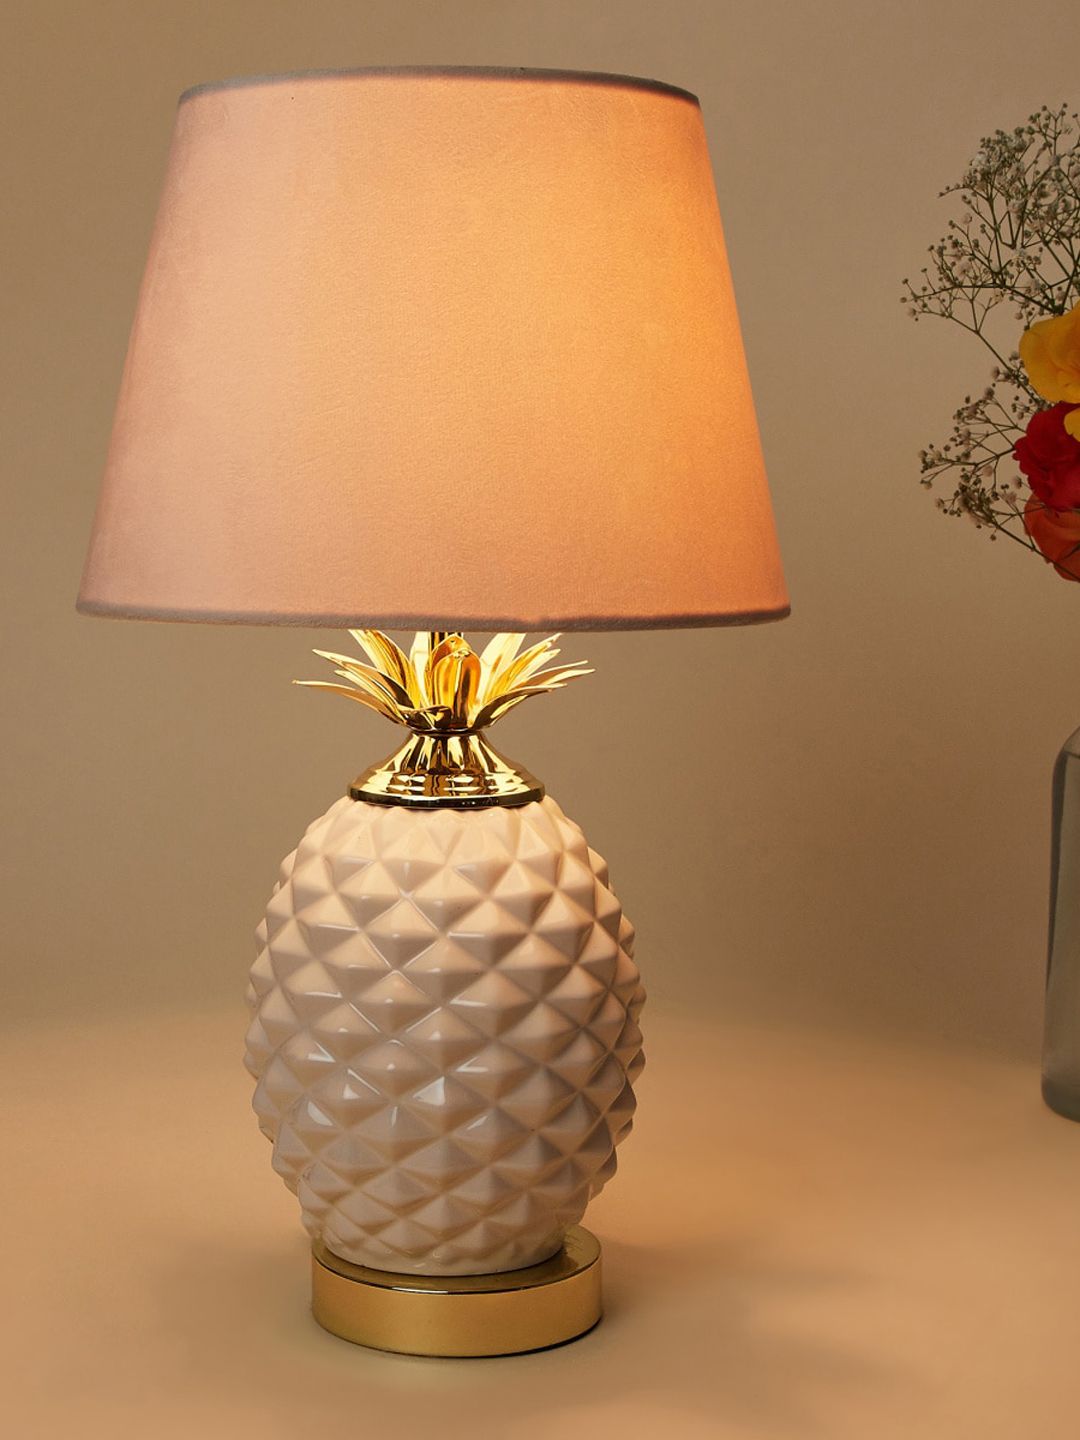 Home Centre Cream Colored Textured Metal with Ceramic Electric Table Lamp Price in India